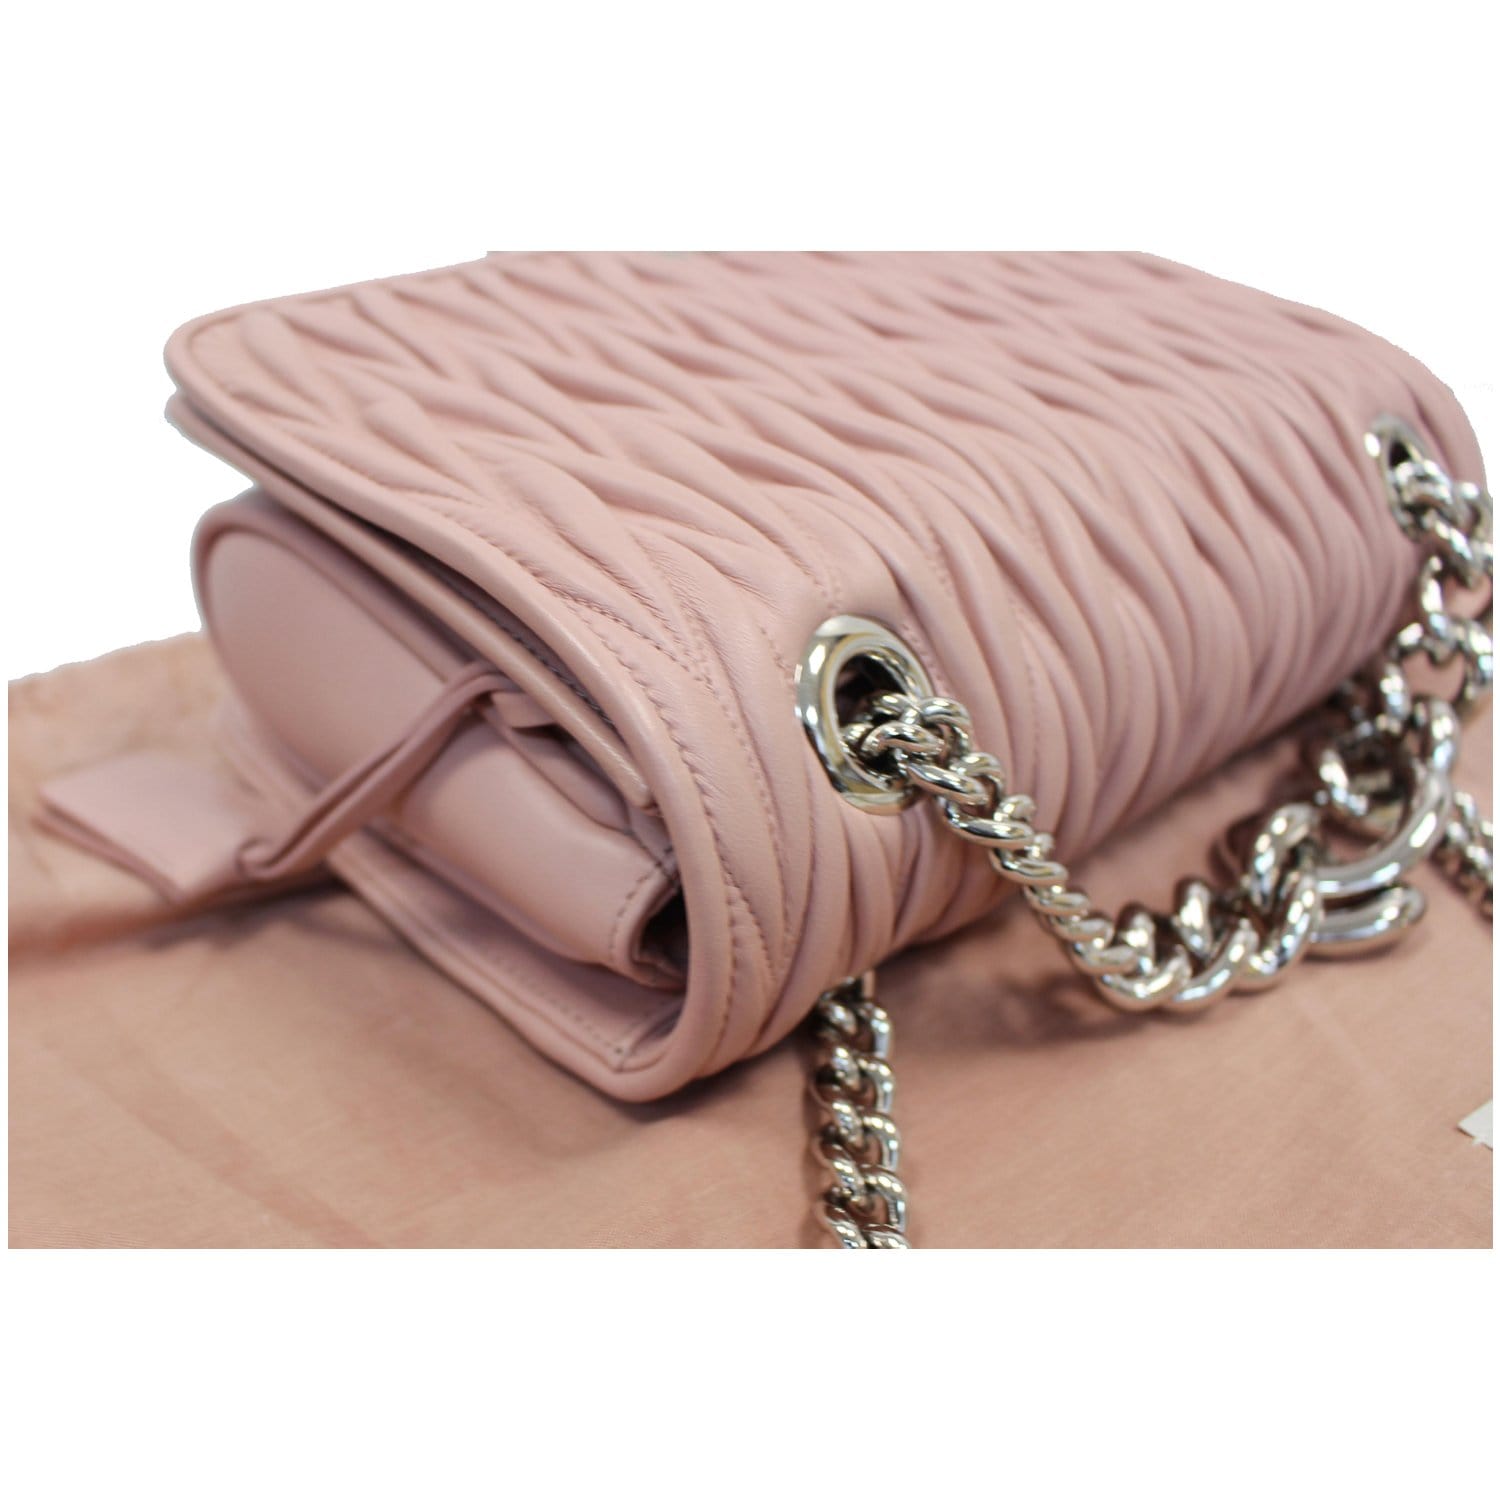 How to Wear Light Pink Miu Miu Bag - Search for Light Pink Miu Miu Bag